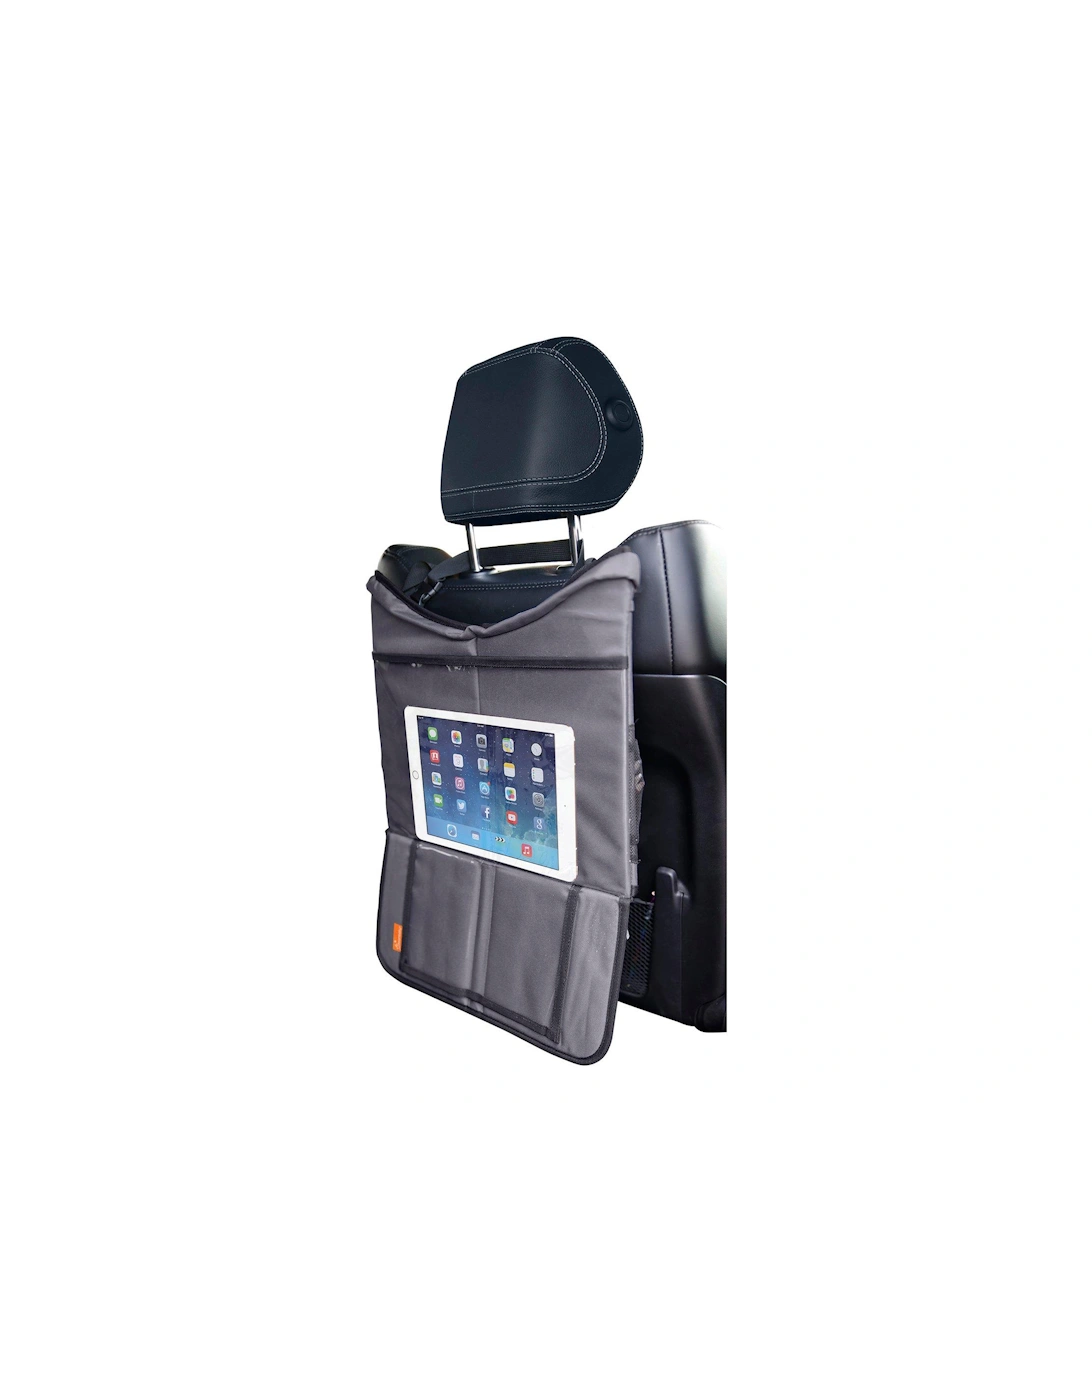 On-the-Go Extra-Large Car Tray Table with Tablet Holder, Storage Pockets & Carry Strap